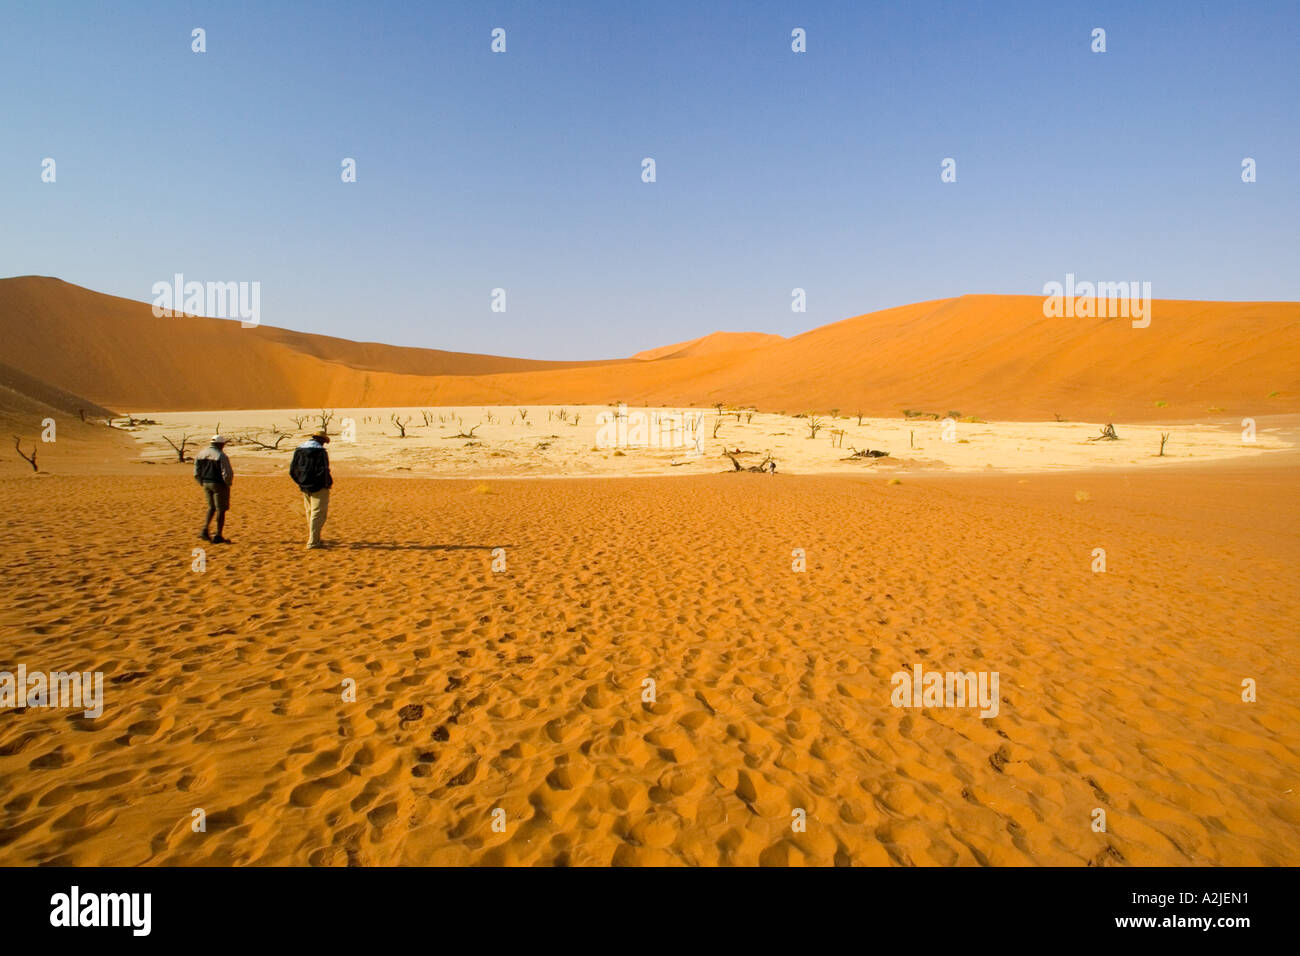 Namibia, Africa: Two Hikers at Sossusvlei (Deadpan) Stock Photo